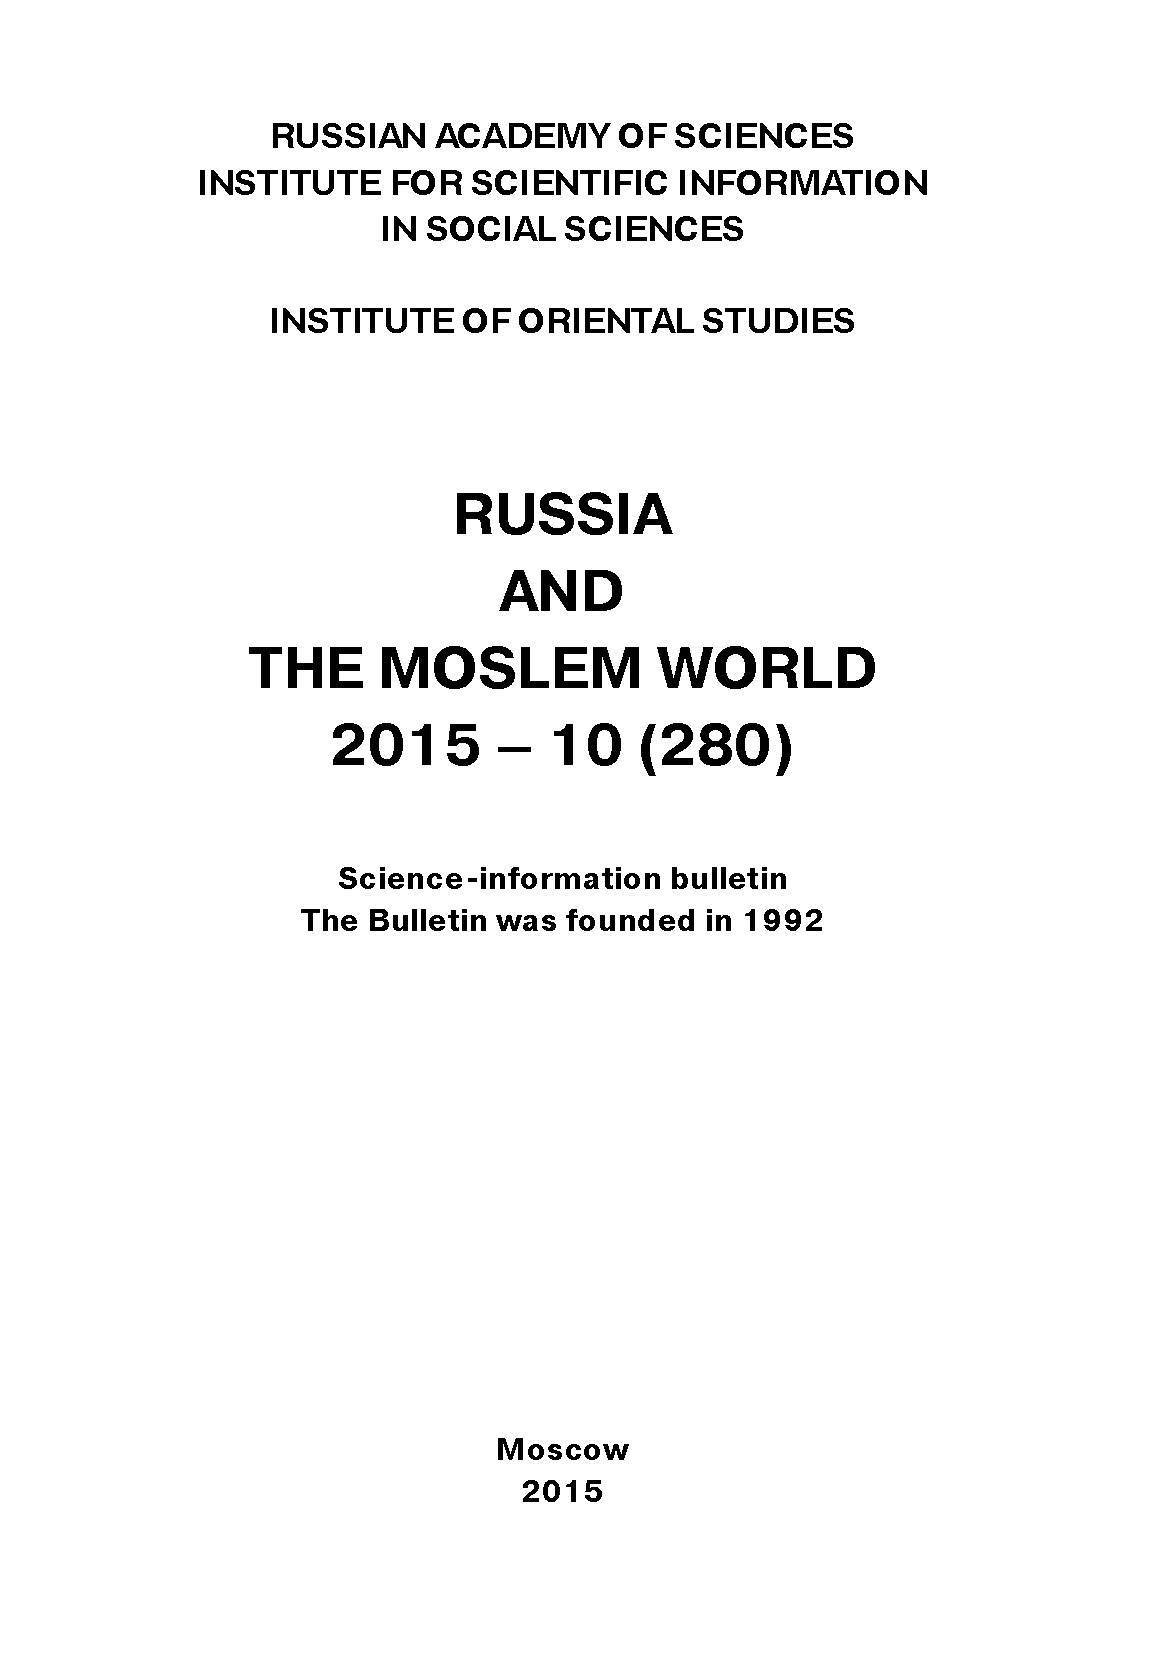 Russia and the Moslem World№ 10 / 2015